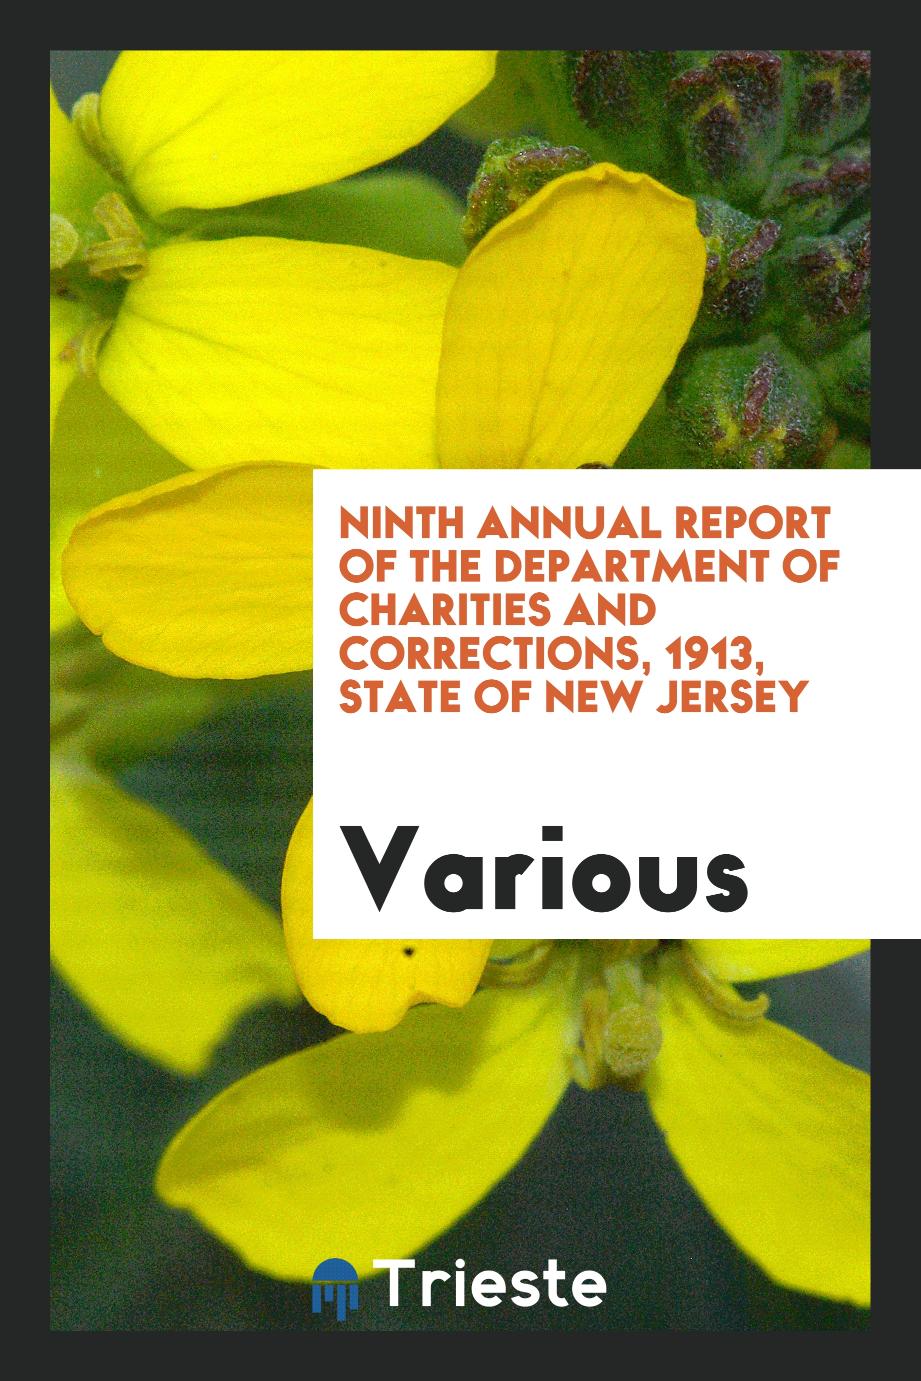 Ninth Annual Report of the department of charities and corrections, 1913, State of New Jersey